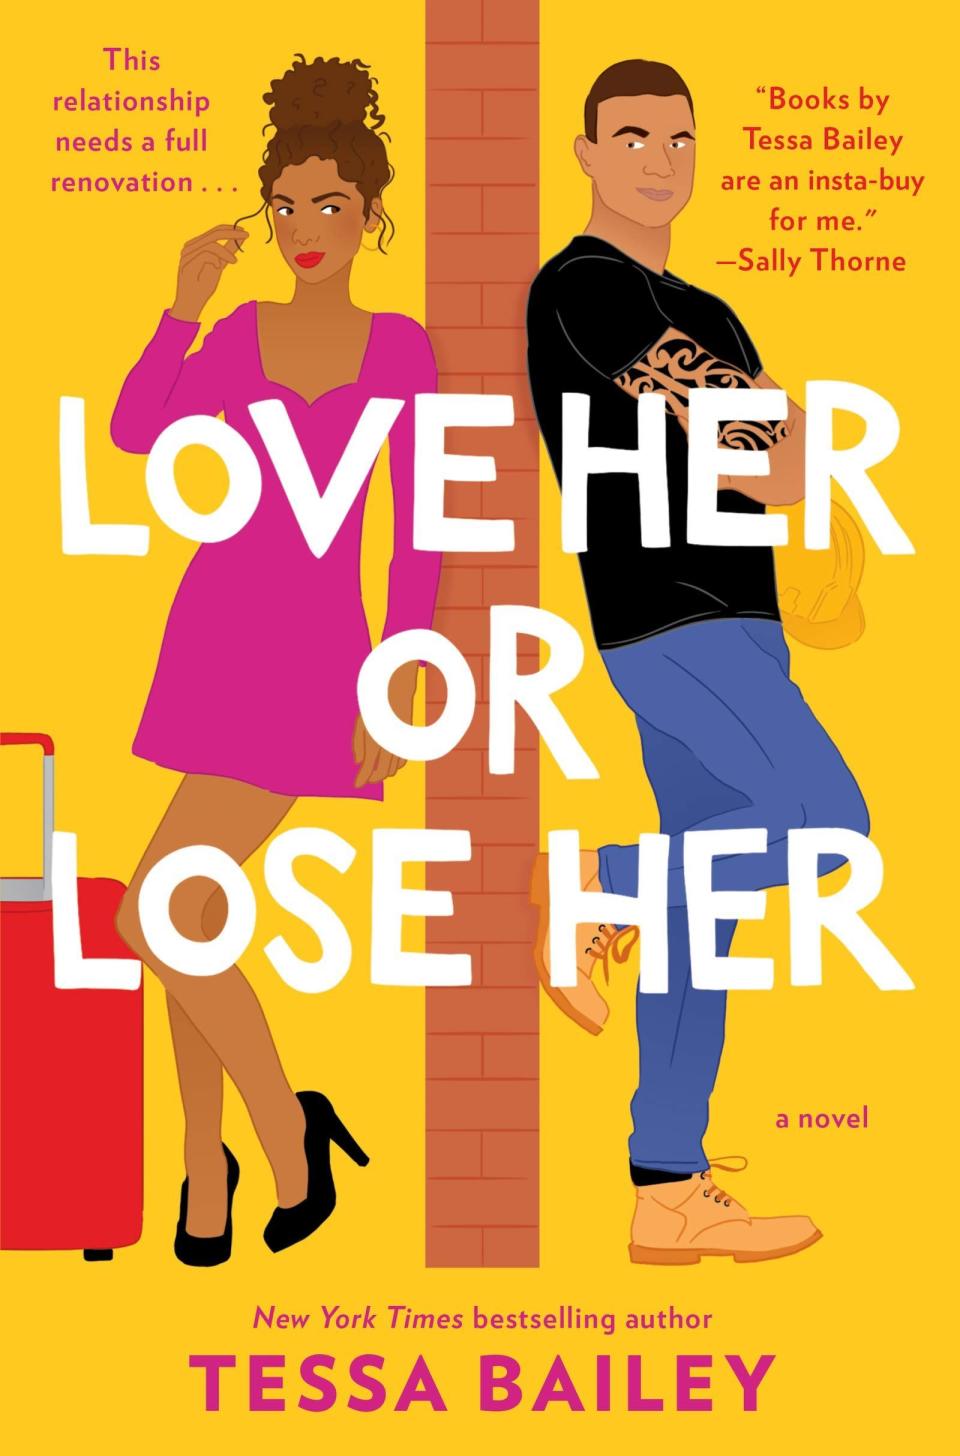 53) 'Love Her or Lose Her' by Tessa Bailey